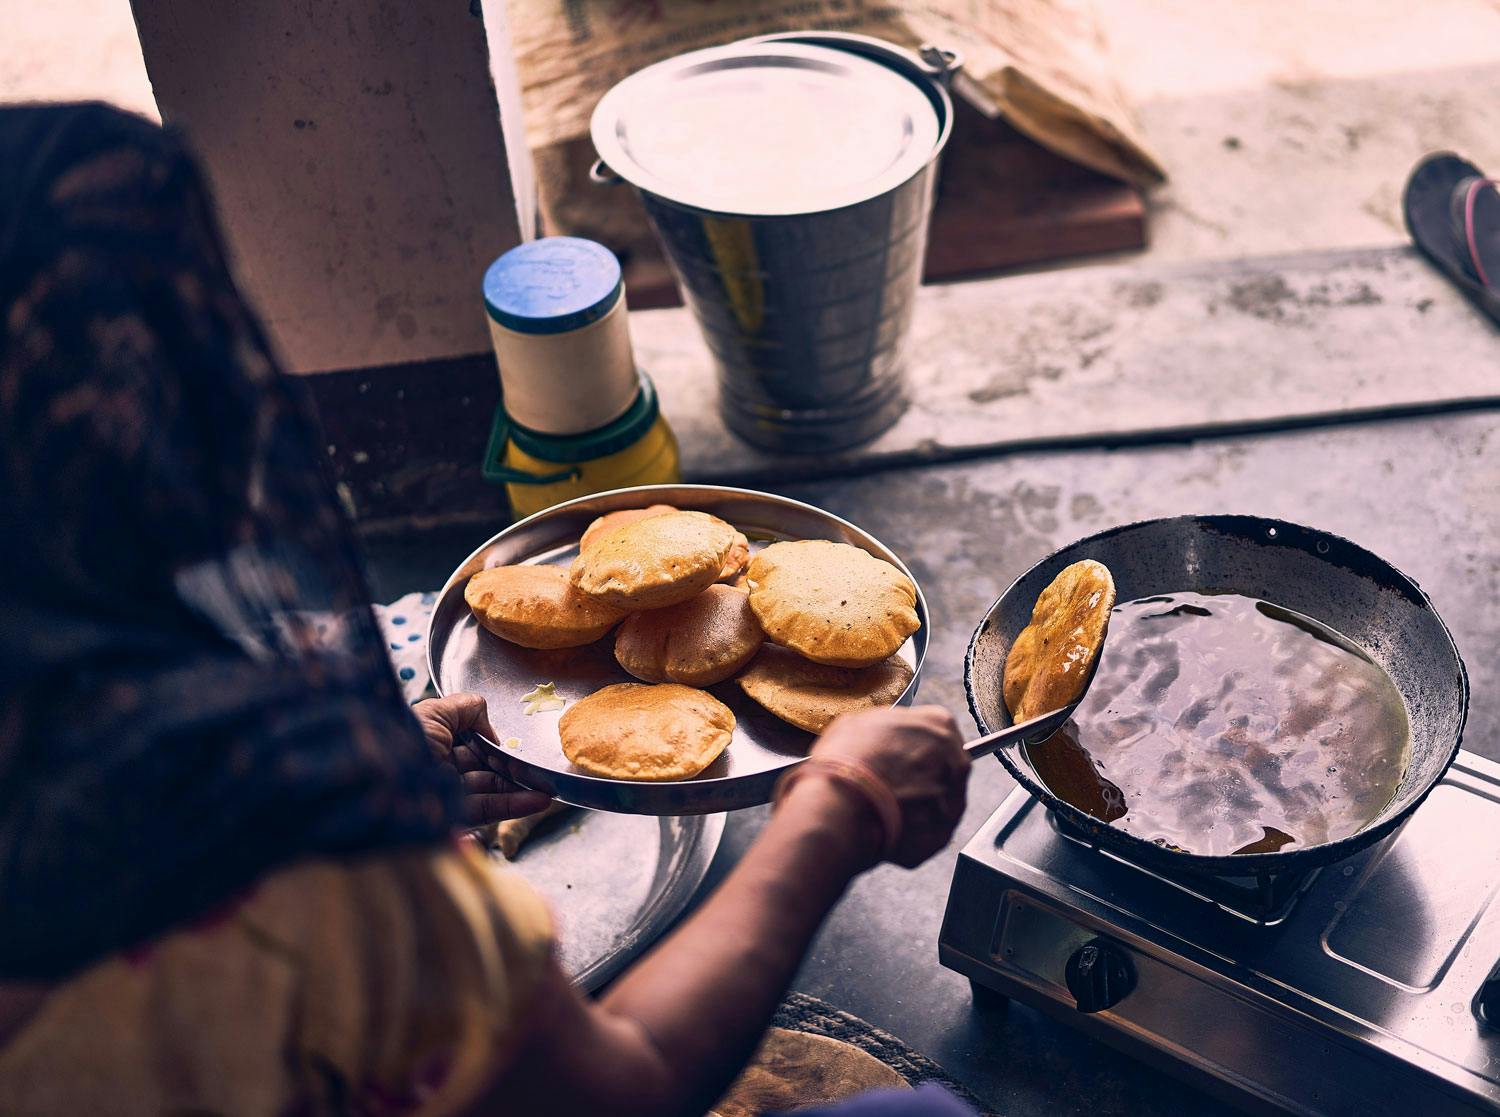 A woman scoops pooris, disks of puffed, fried dough, from a pot of oil with a steel ladle.